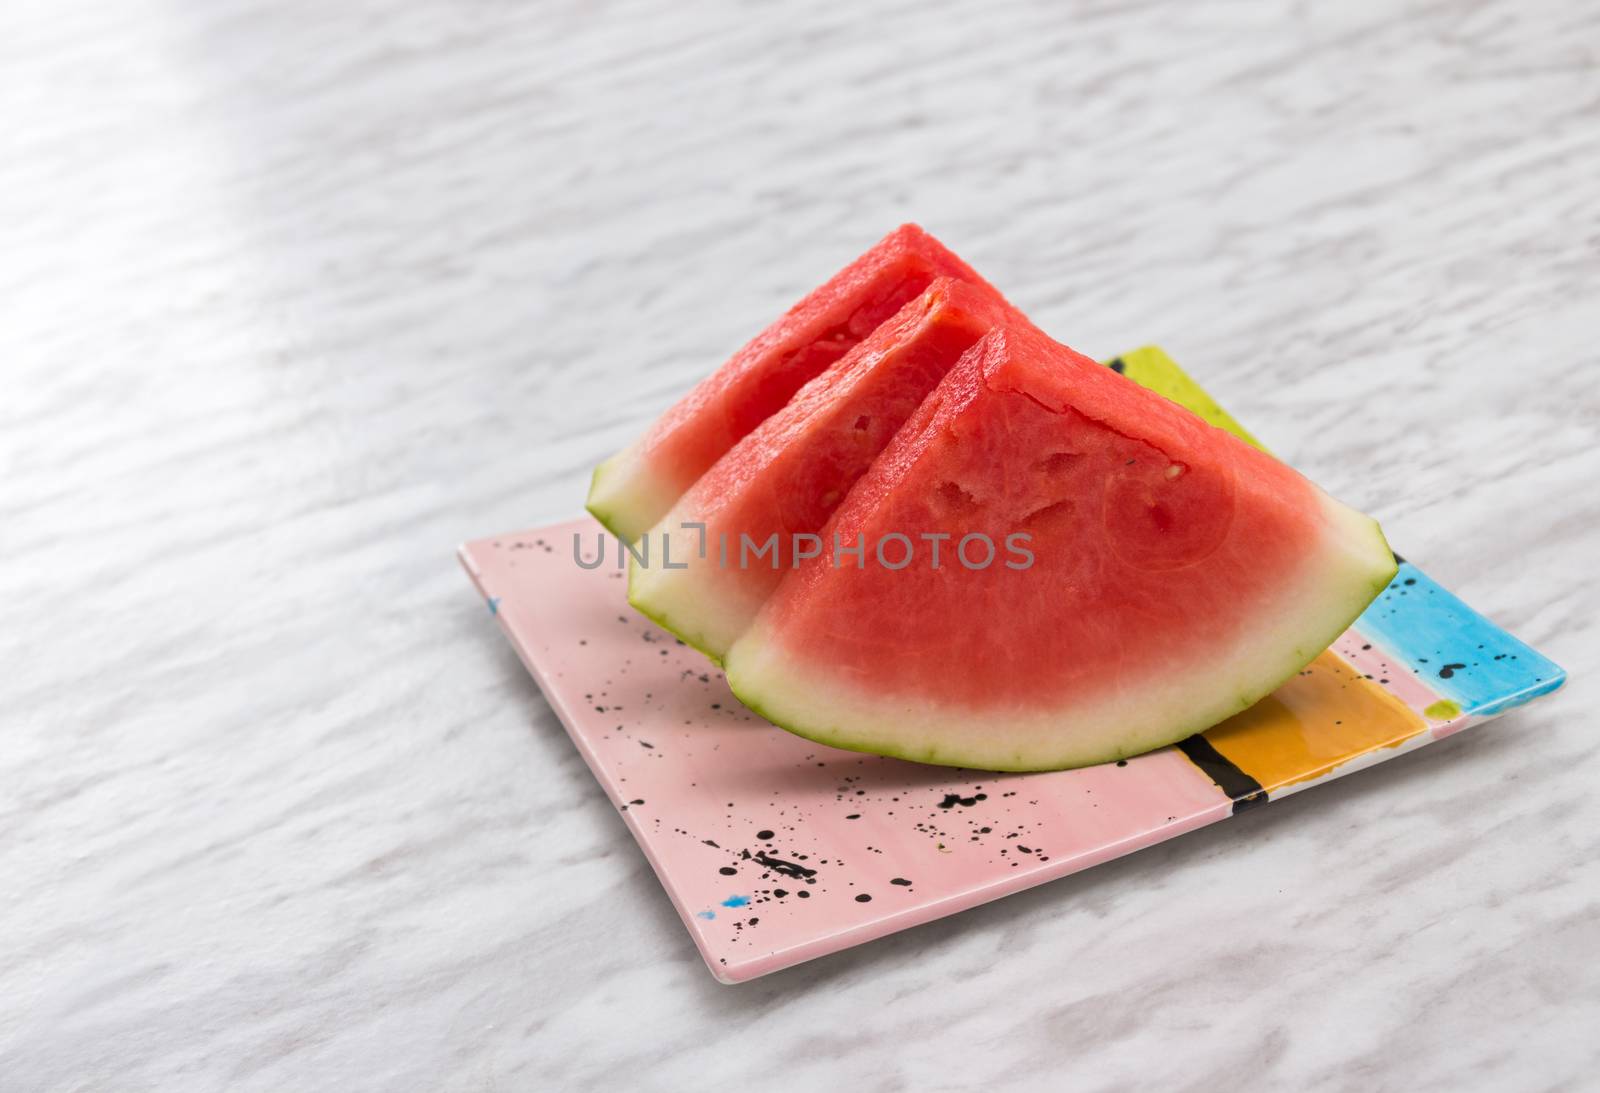 Slices of watermelon on a ceramic plate by anikasalsera